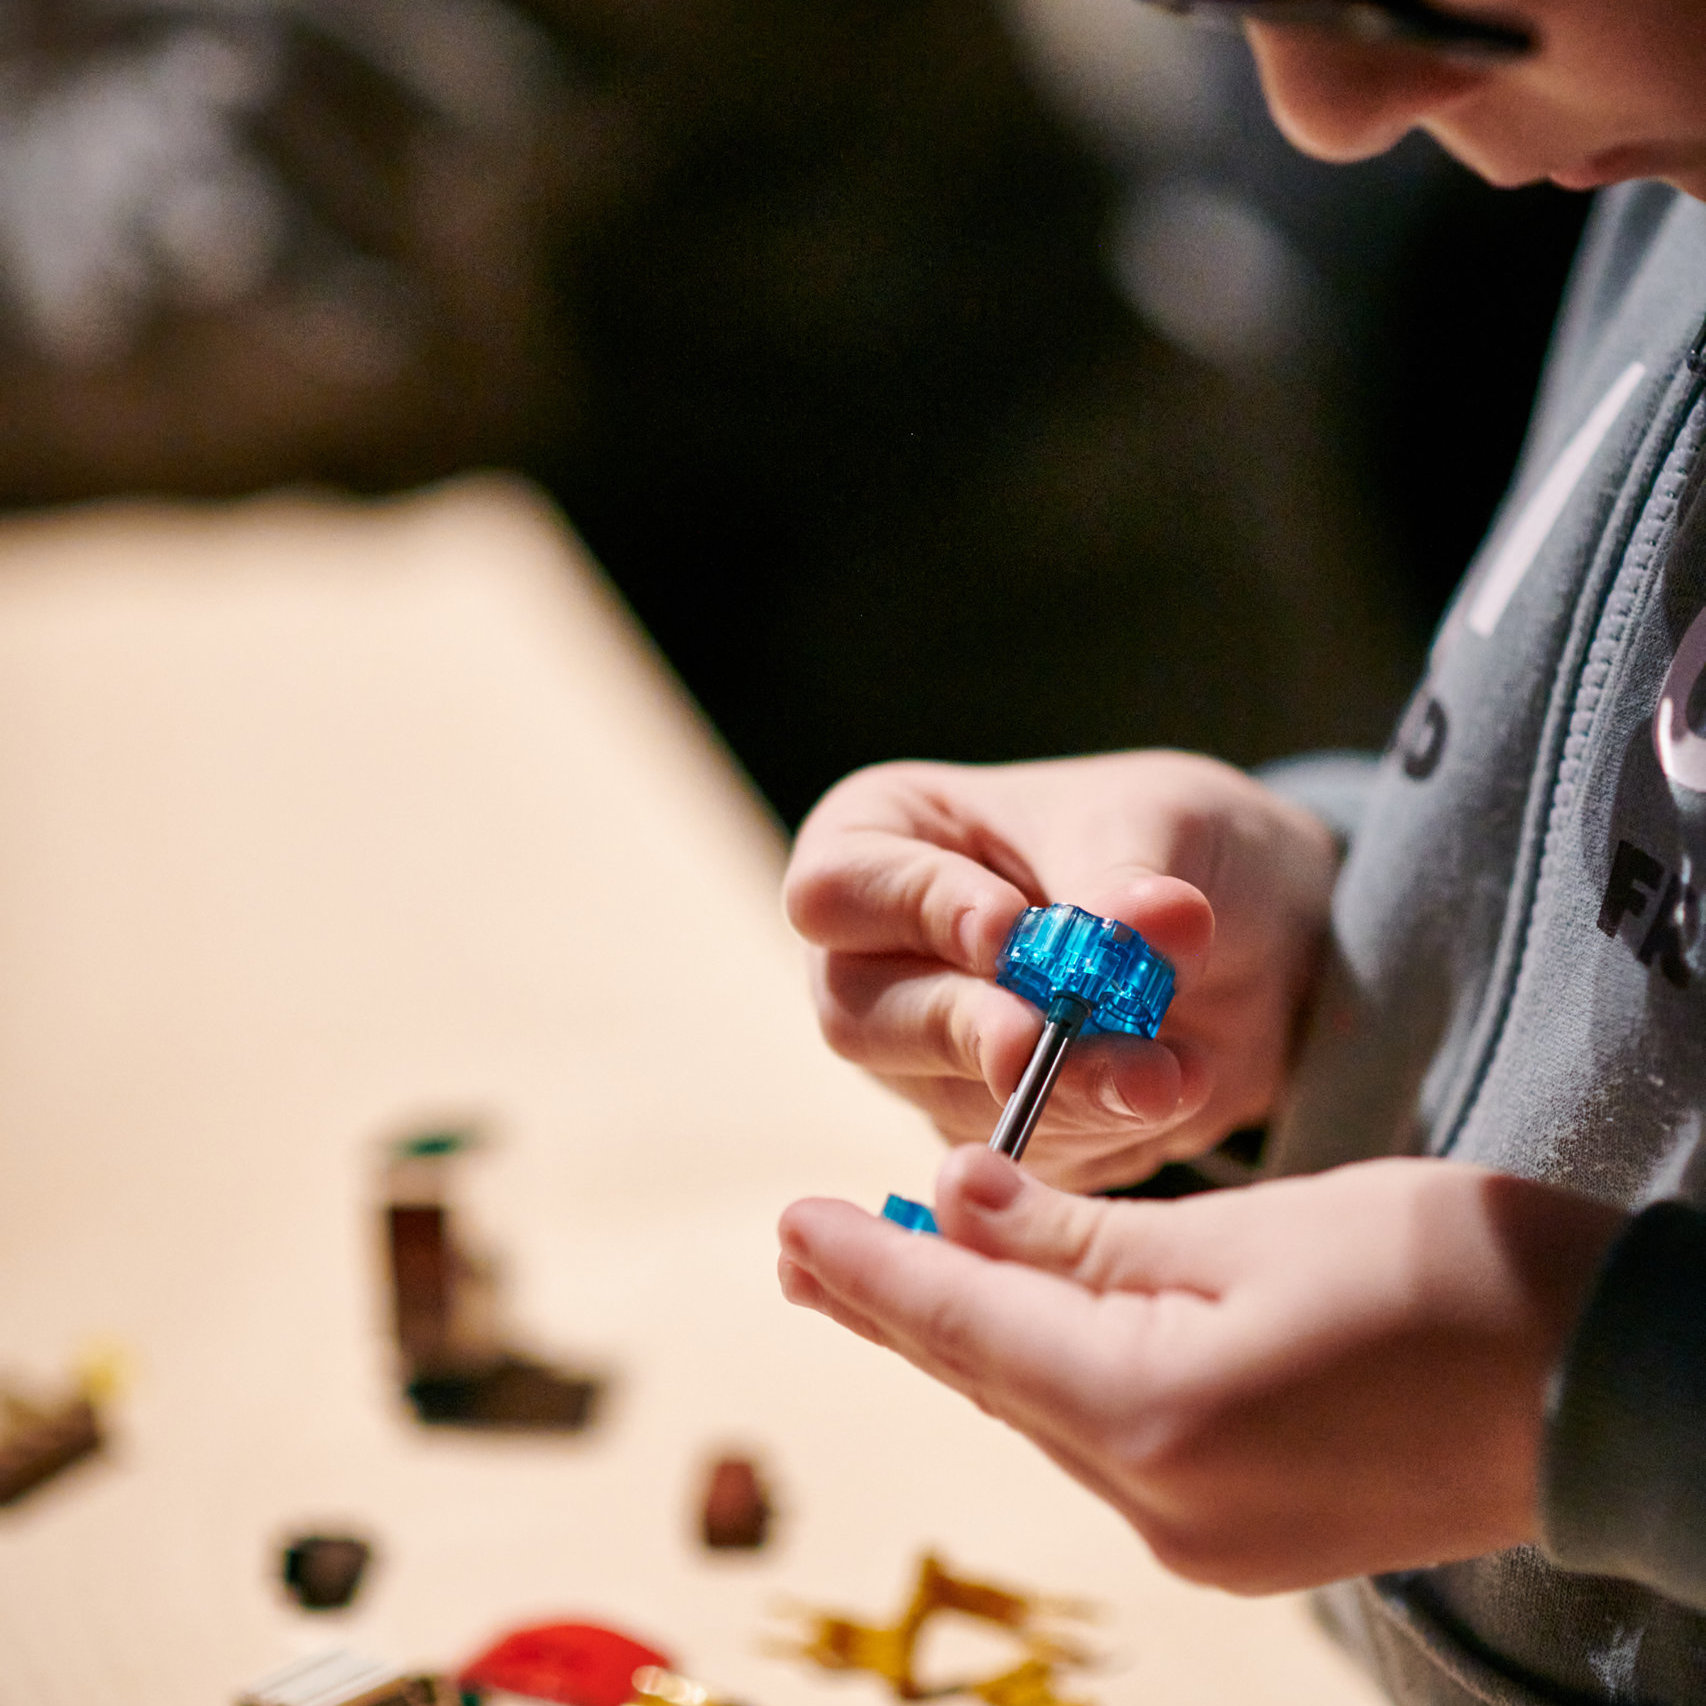 LEGO Tales: Story and Animation Workshops @ WA museum Maritime